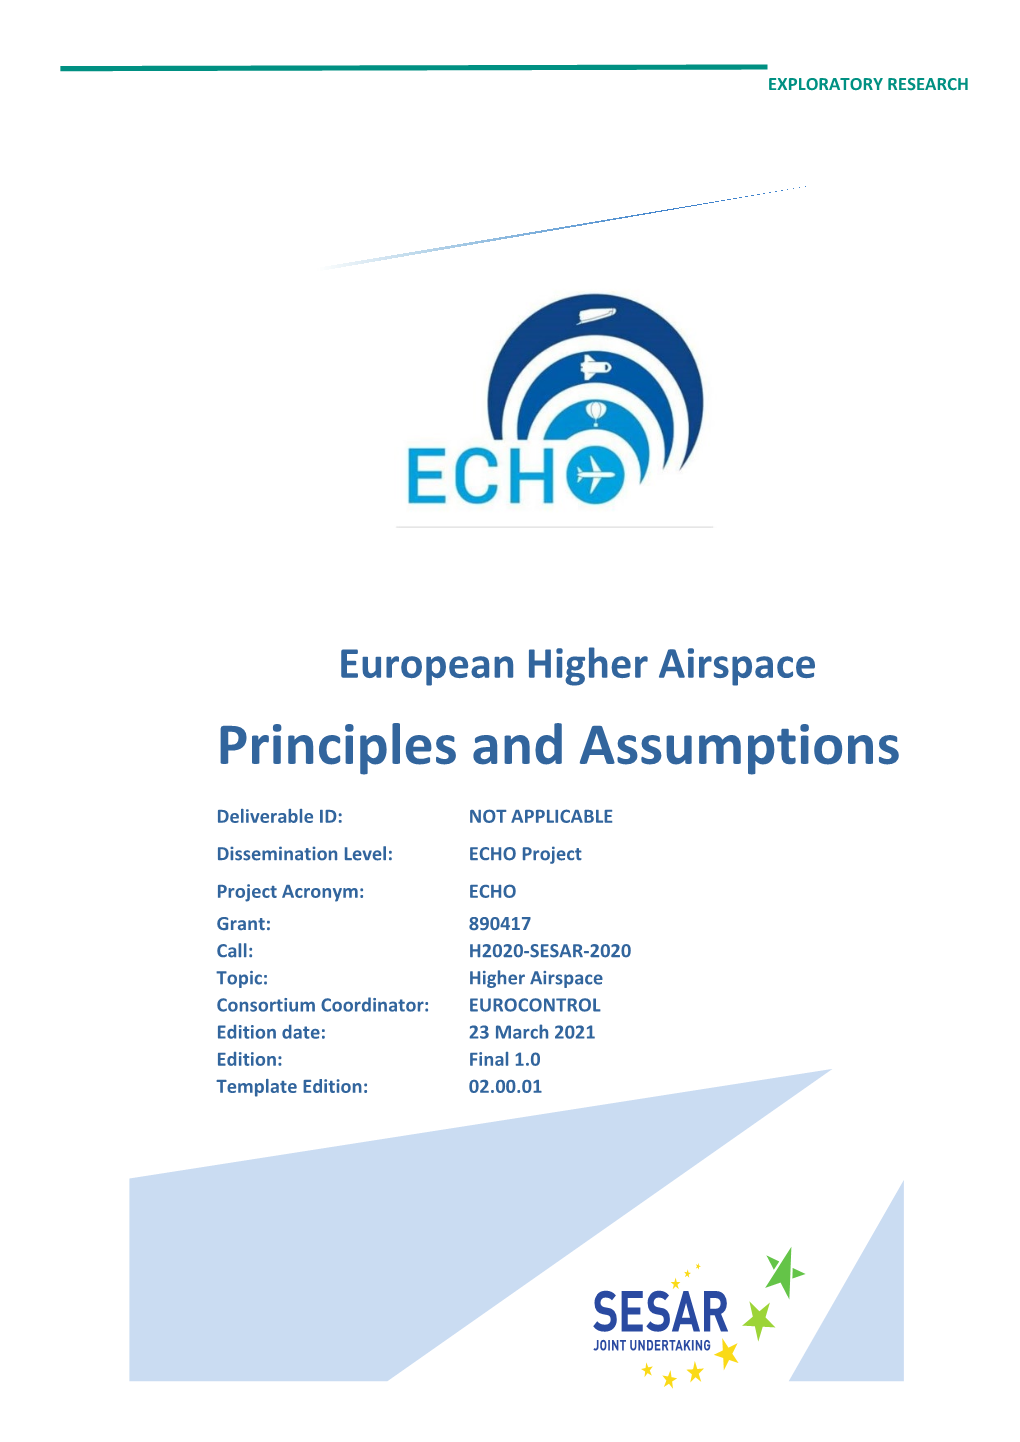 Download the ECHO Principles and Assumptions